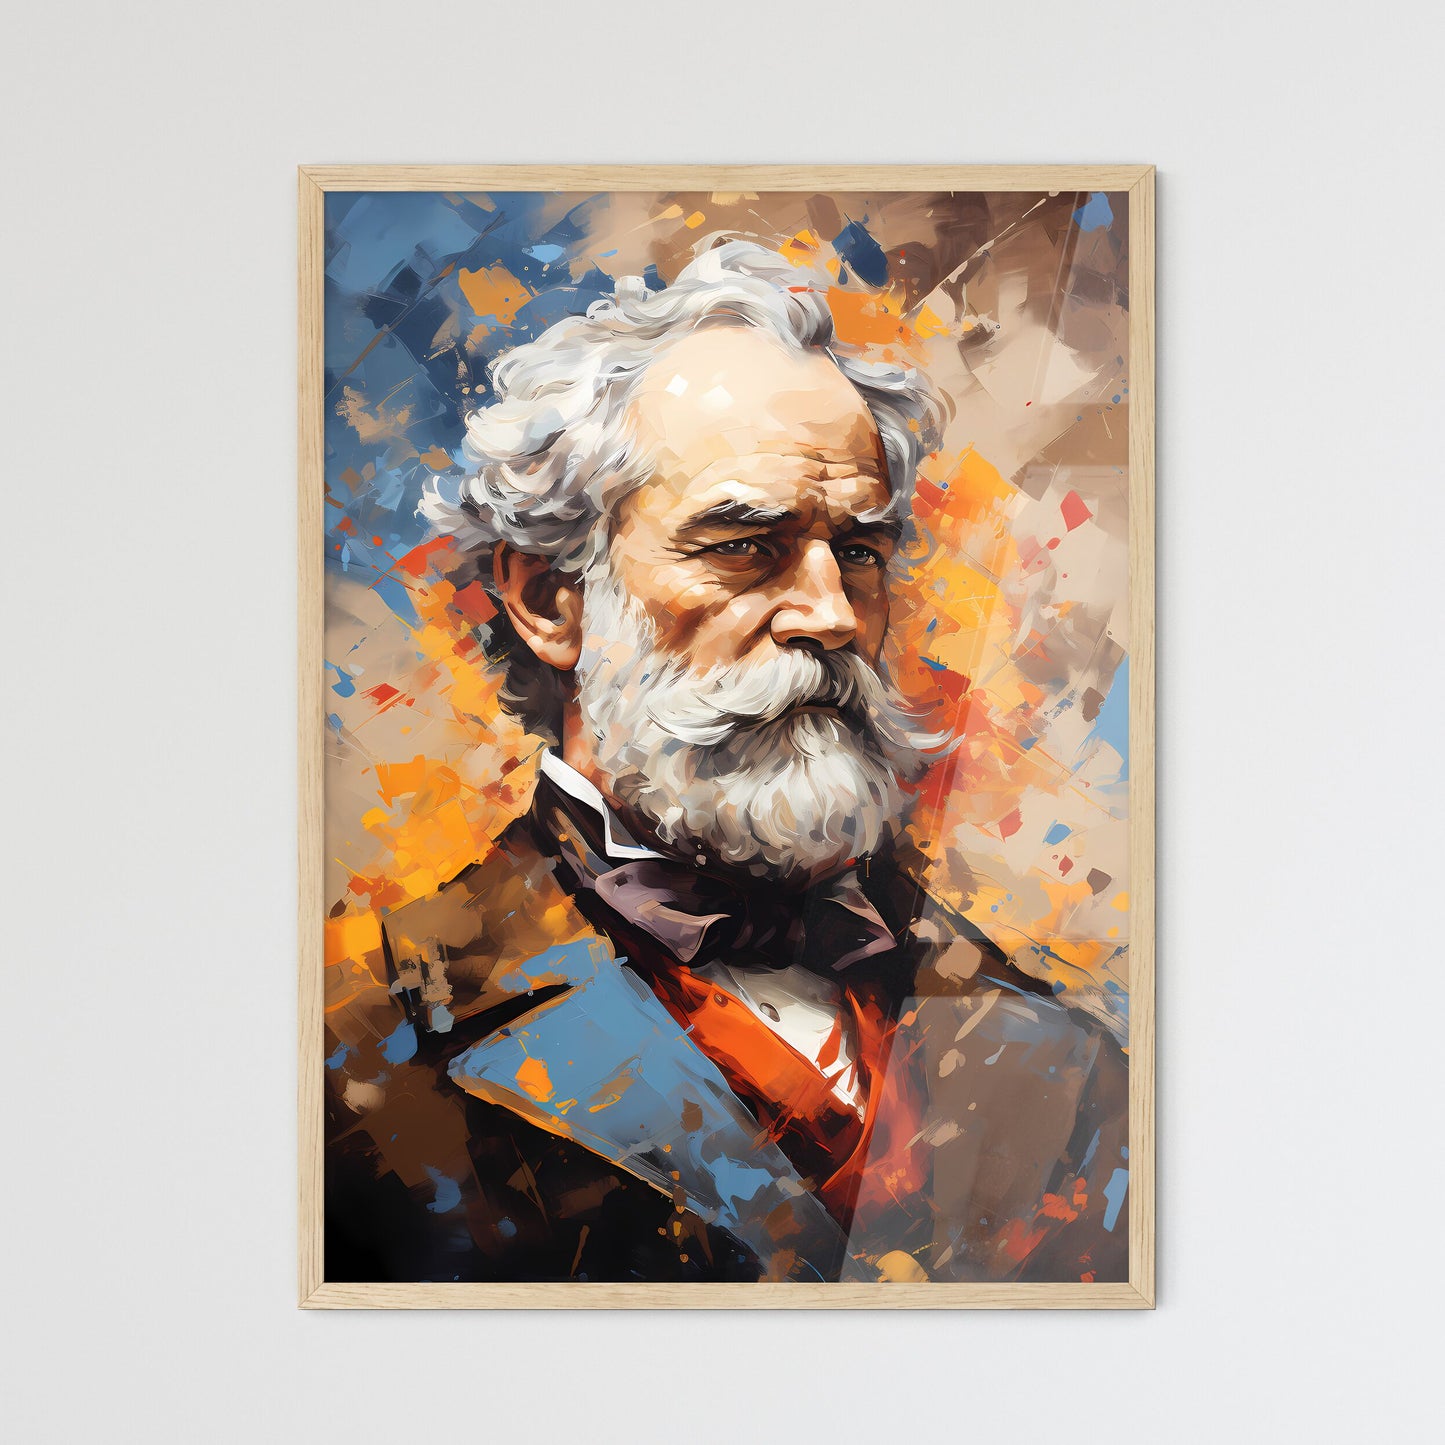 Robert E. Lee - A Painting Of A Man With A White Beard Default Title